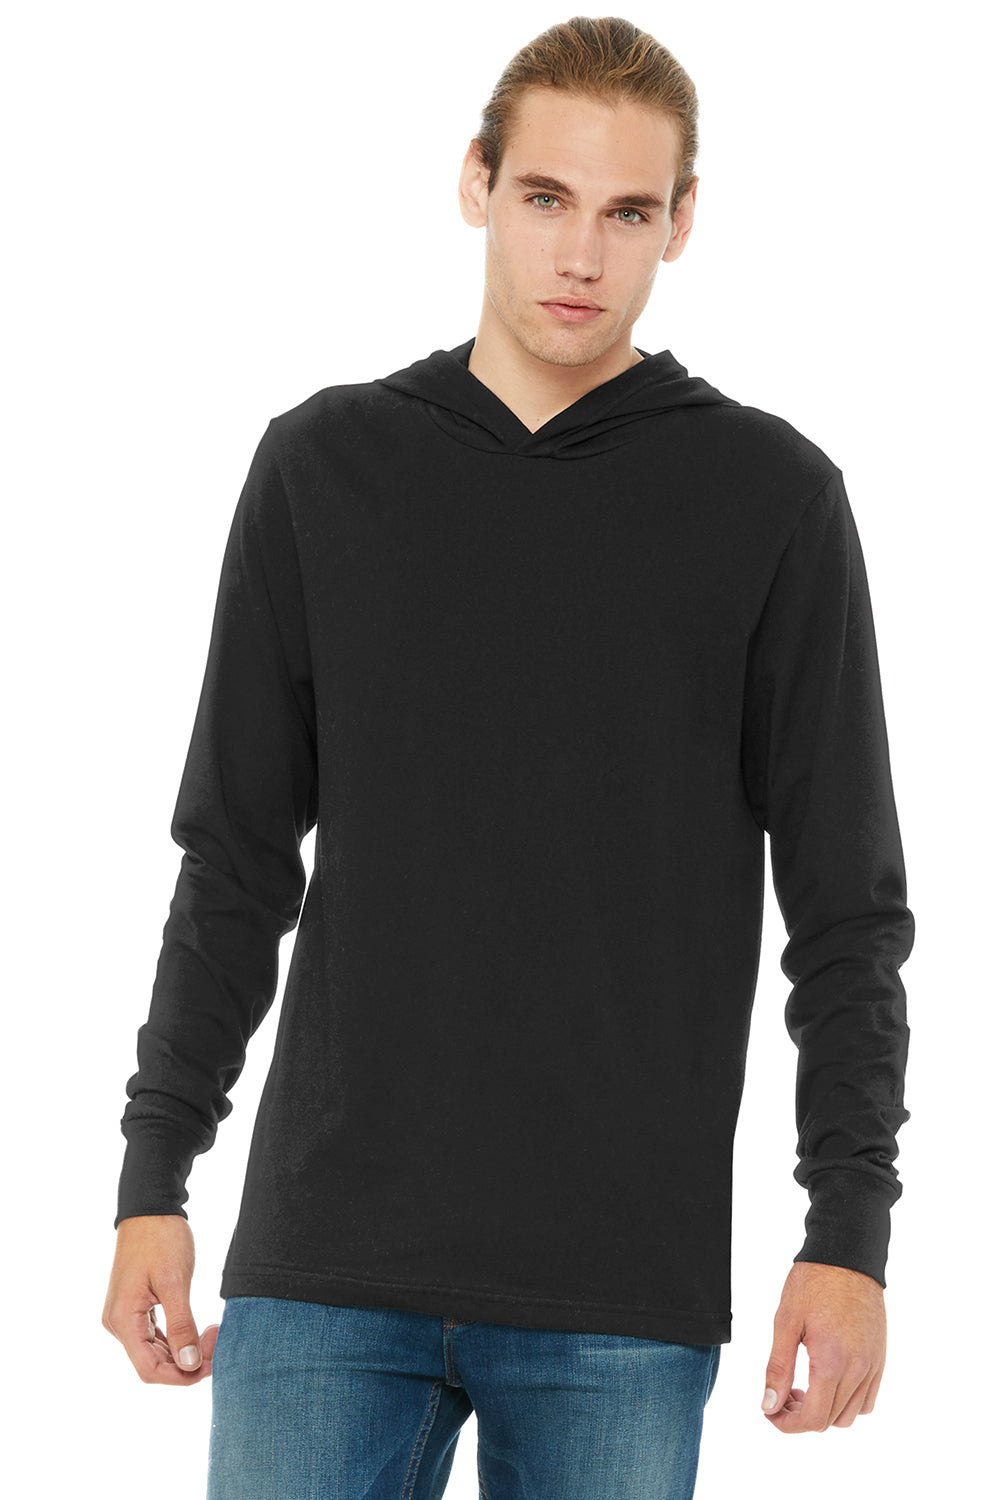 Bella + Canvas BC3512/3512 Mens Jersey Long Sleeve Hooded T-Shirt Hoodie Black Model Front